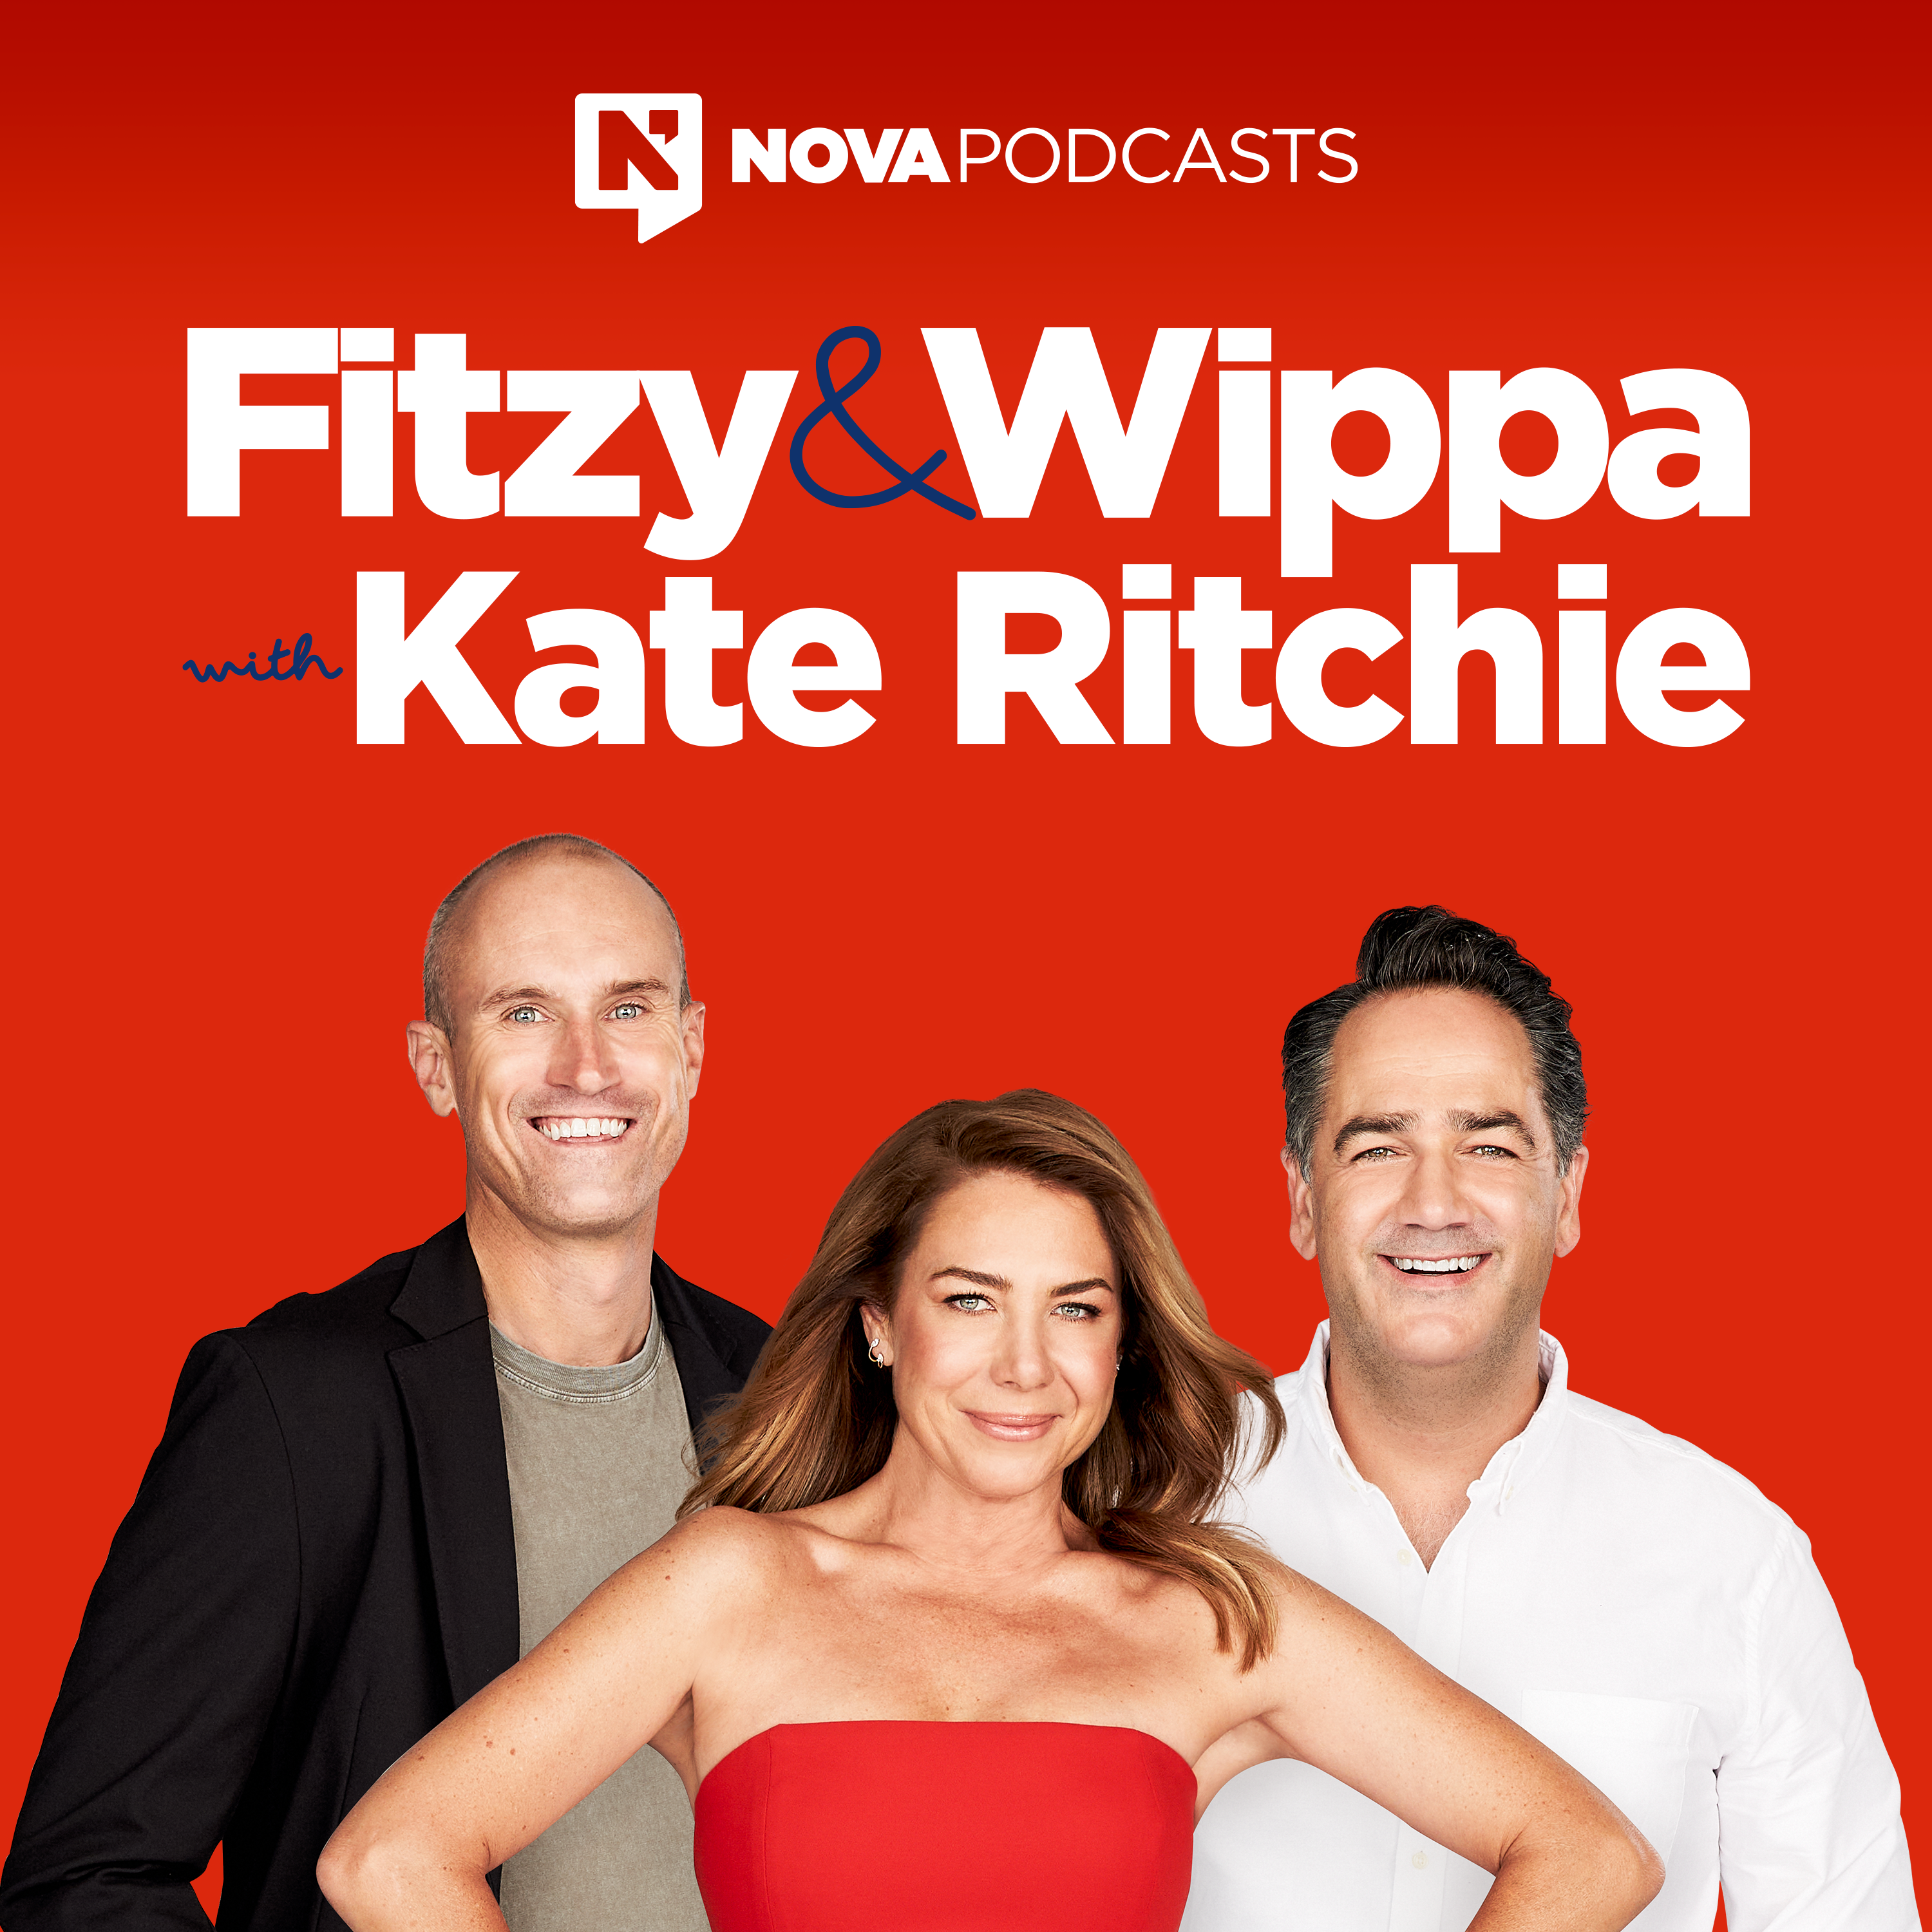 CATCH UP - Wippa's got a 'great' joke for your repertoire